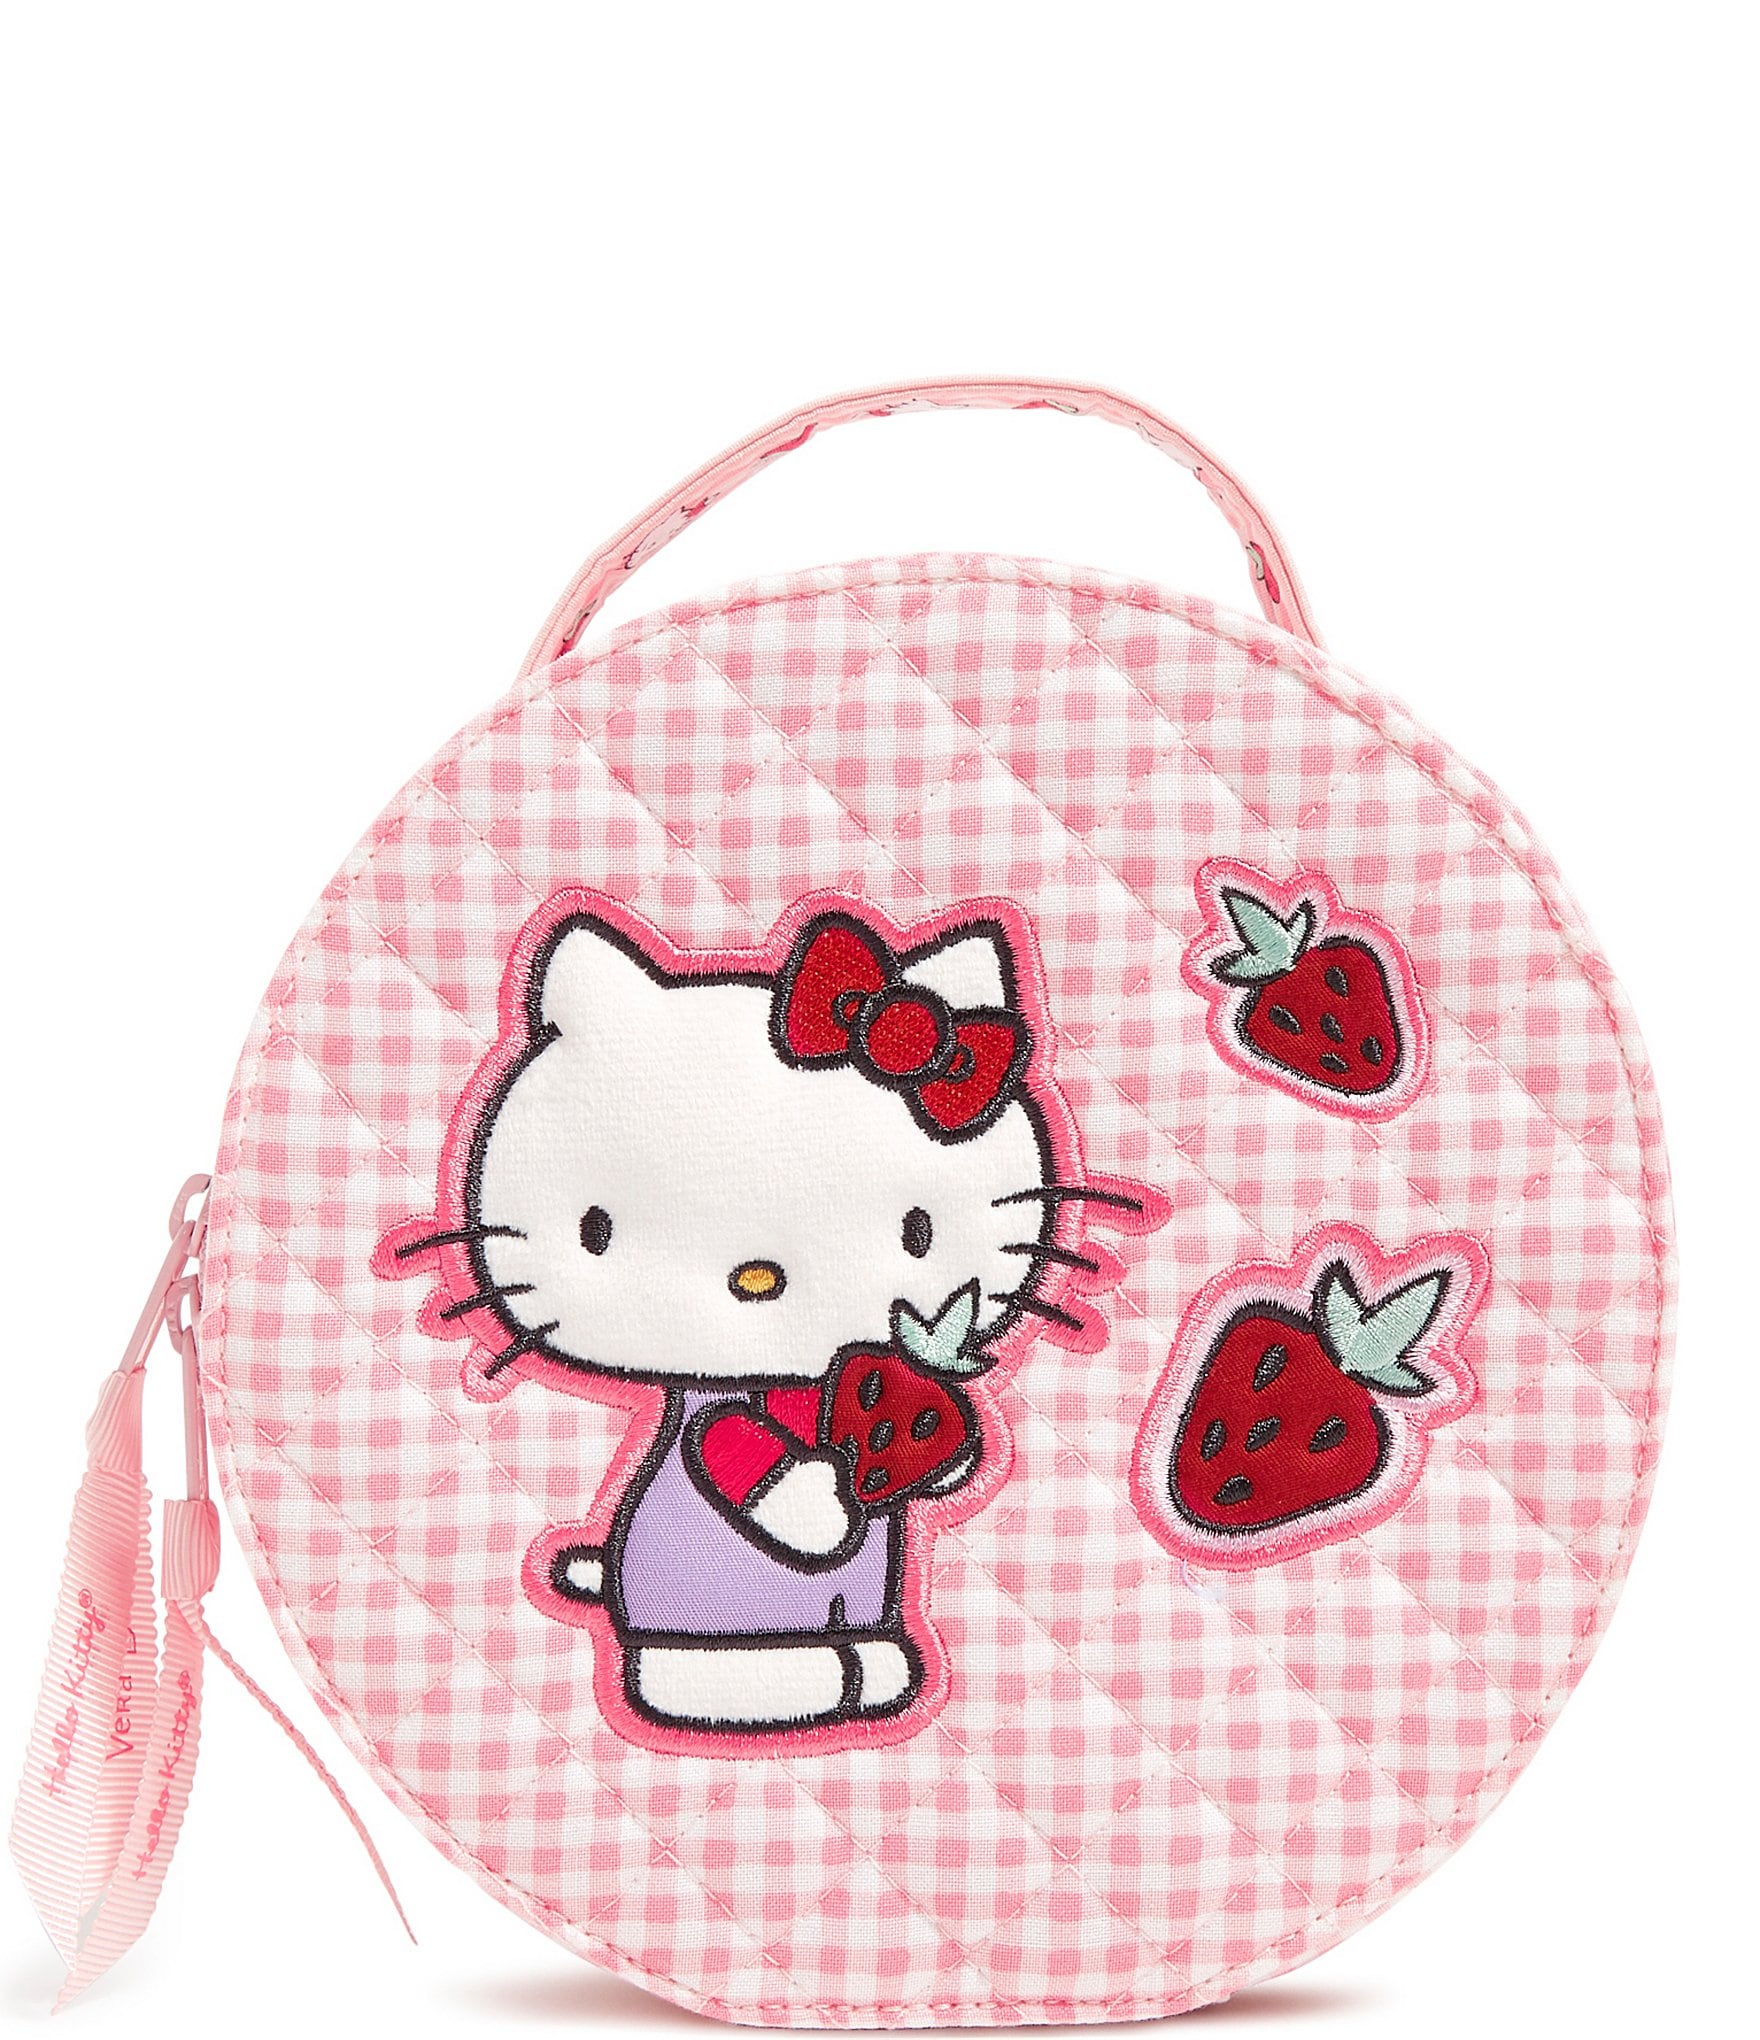 HELLO KITTY CHARACTER Bag Premium Quality Ideal For Everyday Use And Travel  $18.63 - PicClick AU